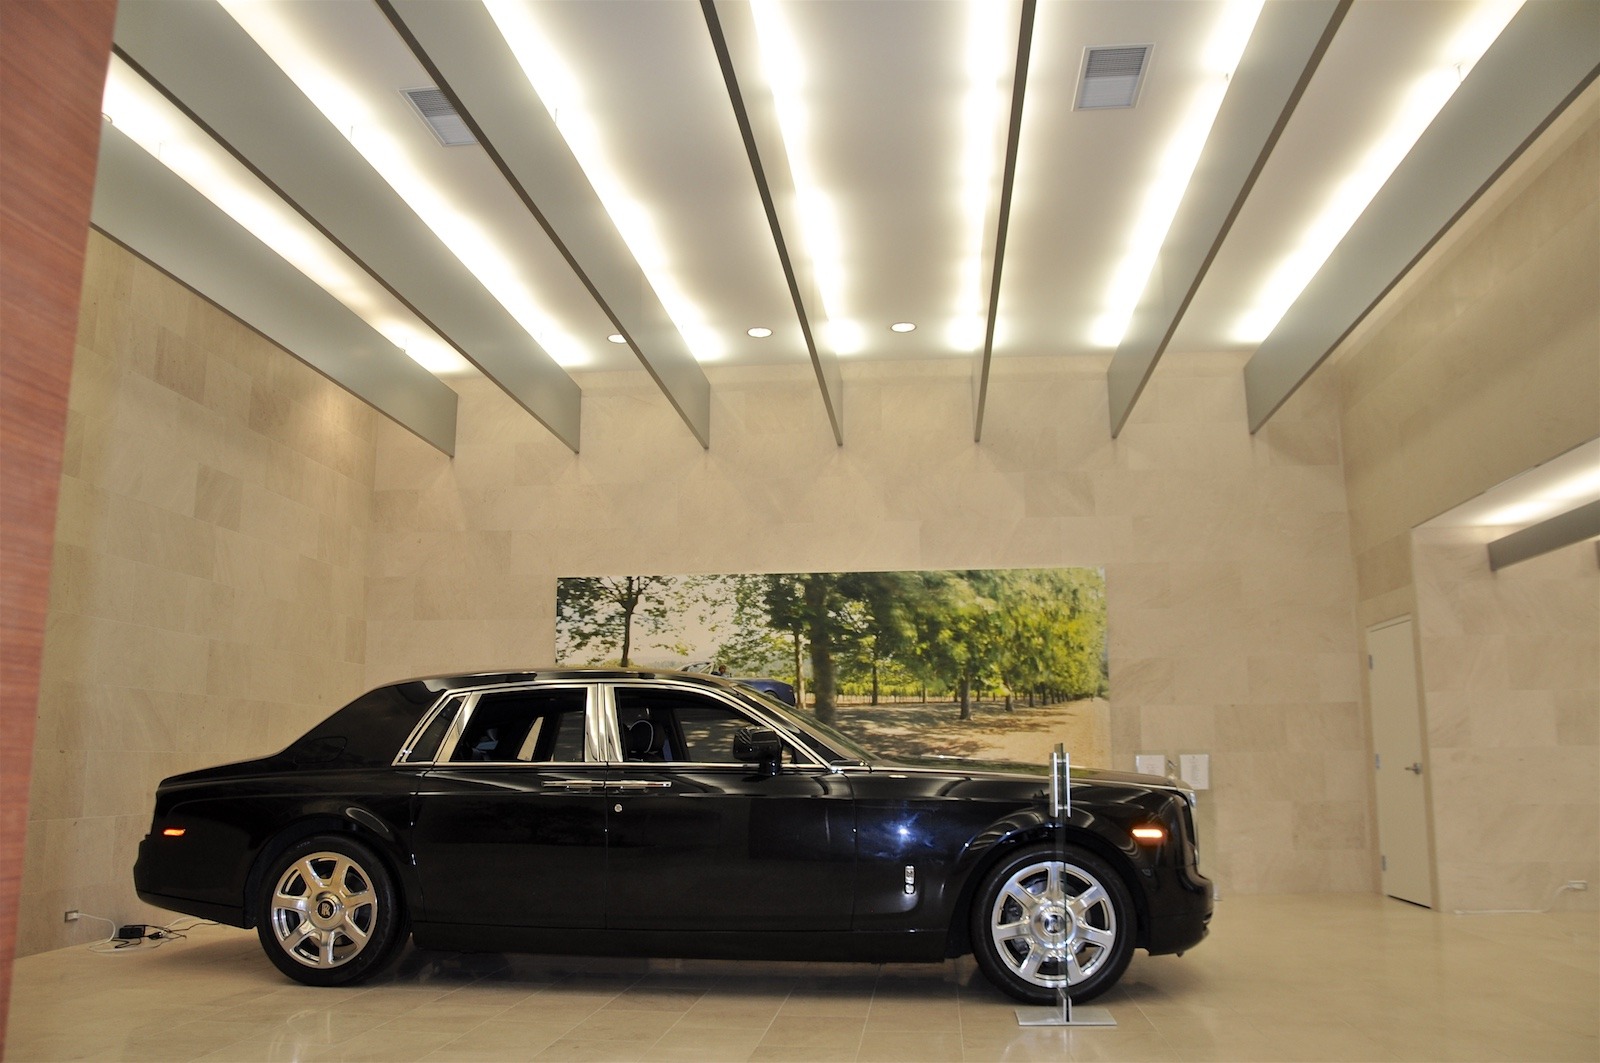 Rolls-Royce Vancouver Luxury Car Dealership Completed 2013